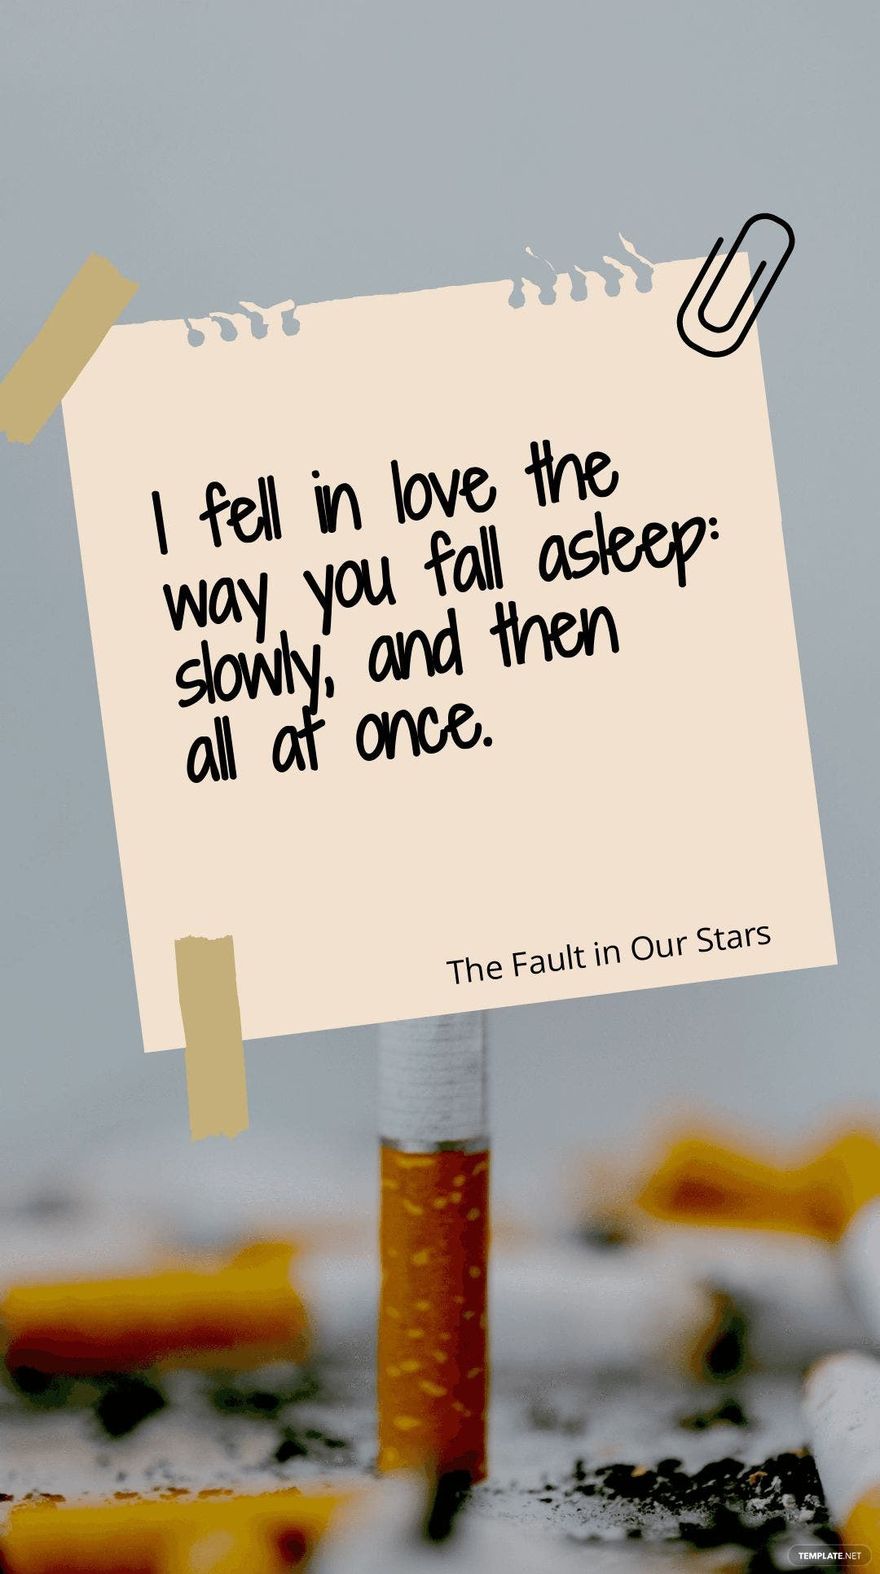 The Fault in Our Stars - “I fell in love the way you fall asleep: slowly, and then all at once.”